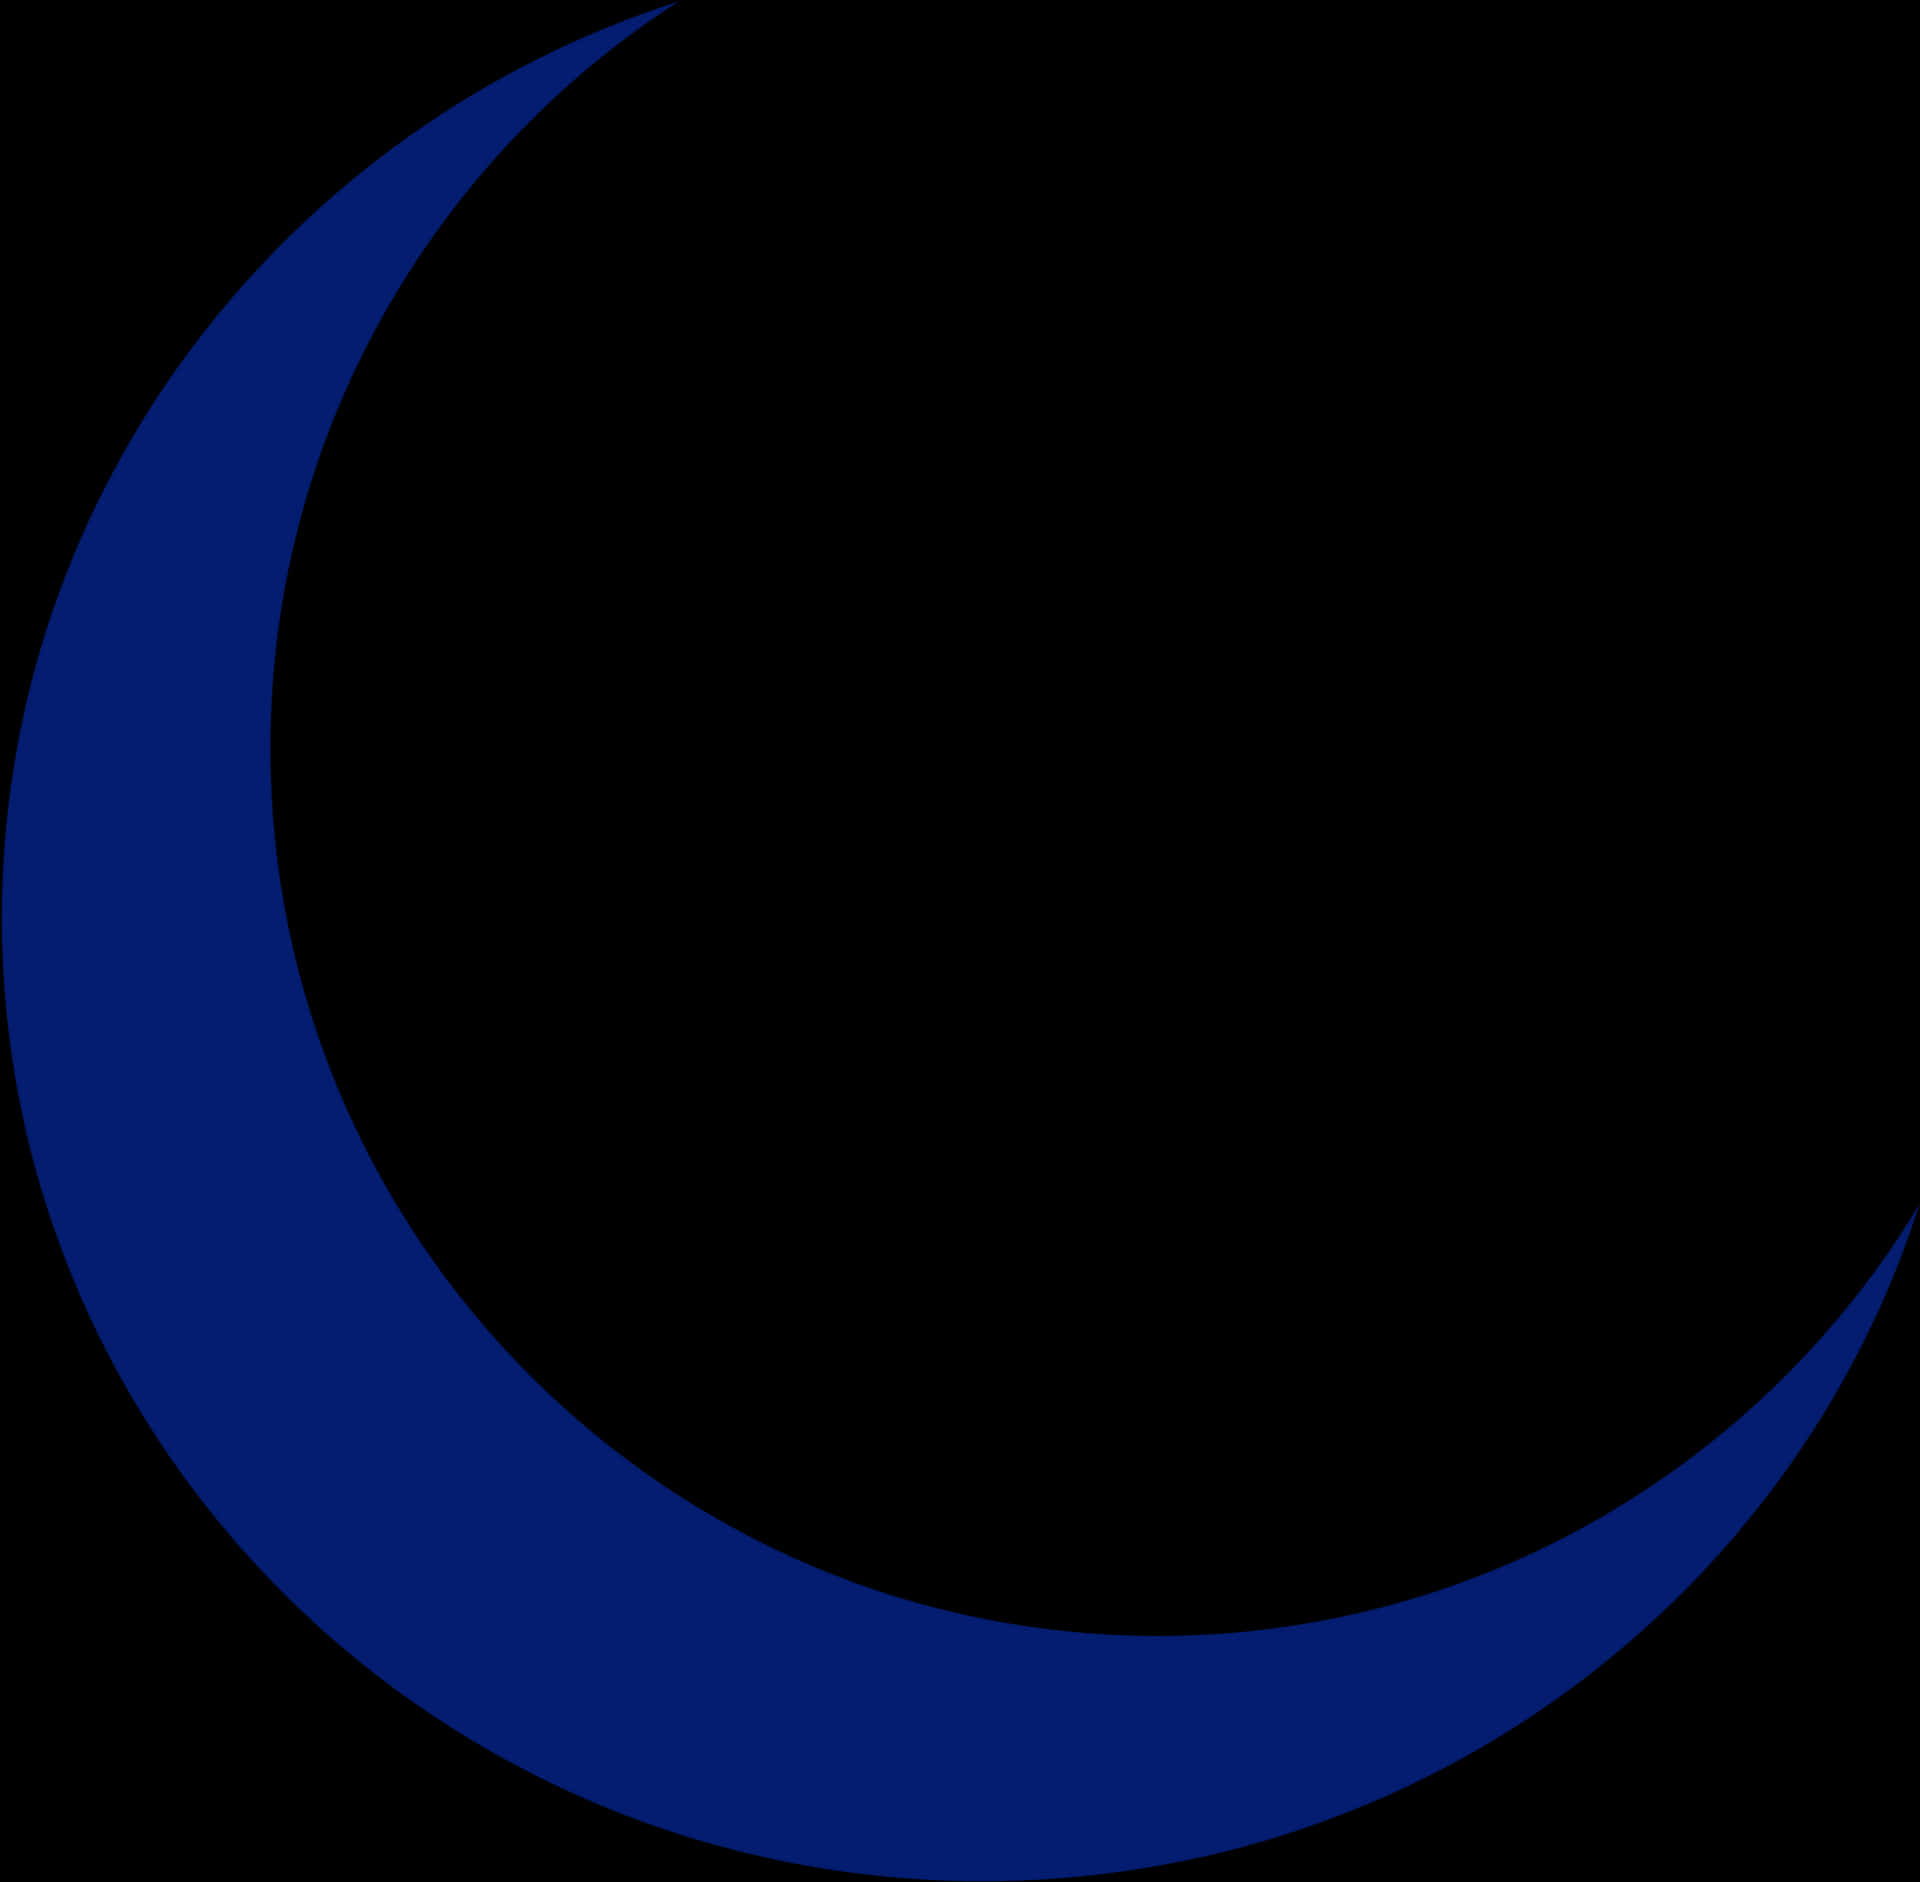 Blue Crescent Moon Graphic PNG